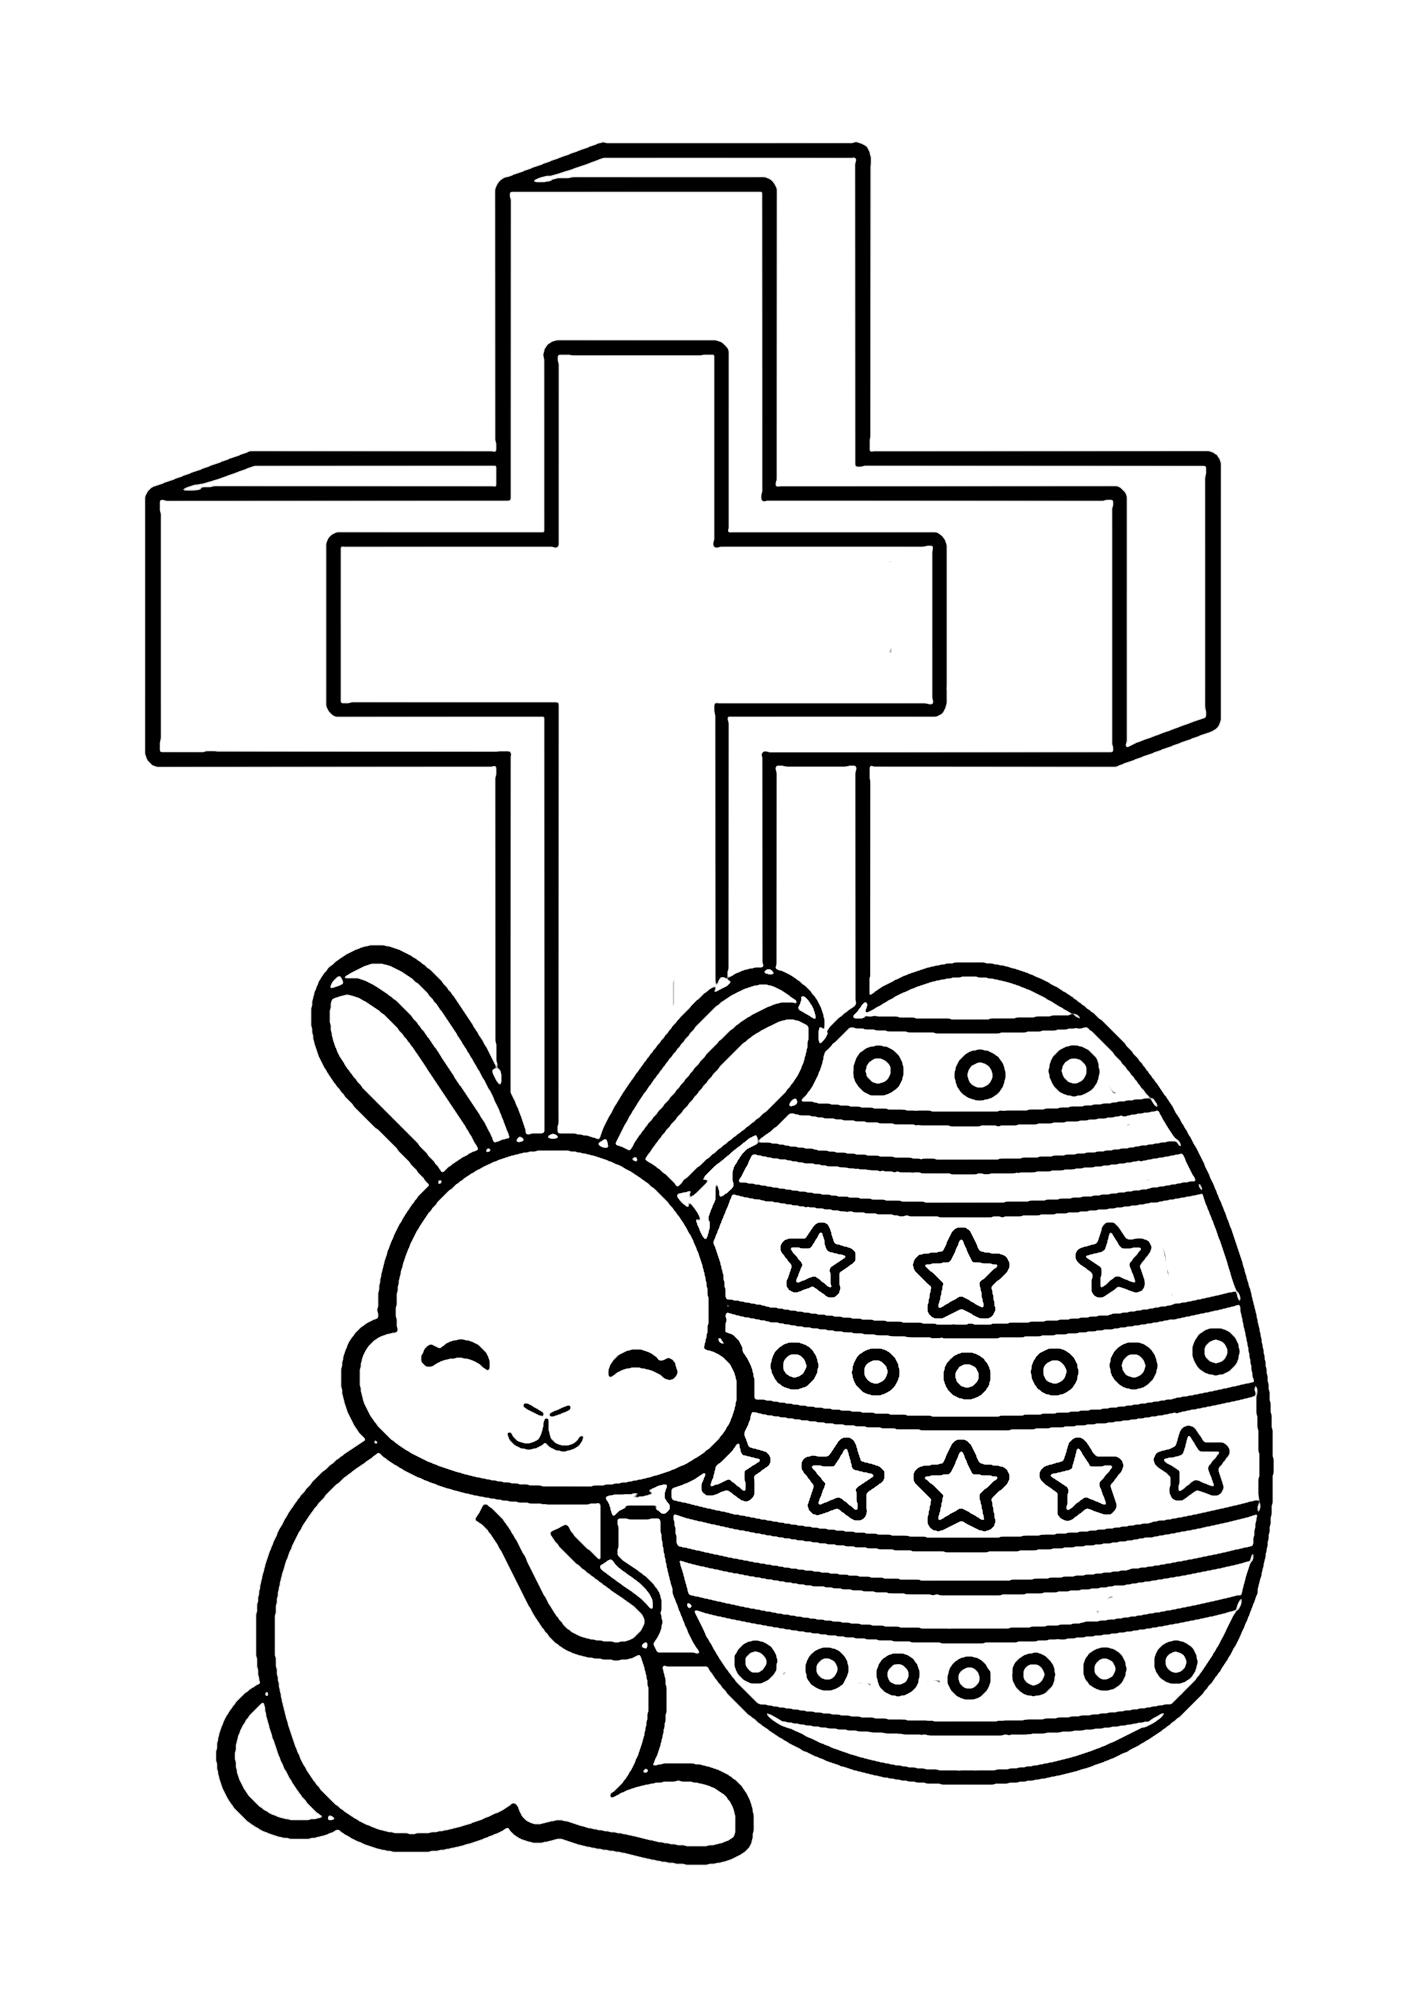 Easter Cross Drawing Coloring Page